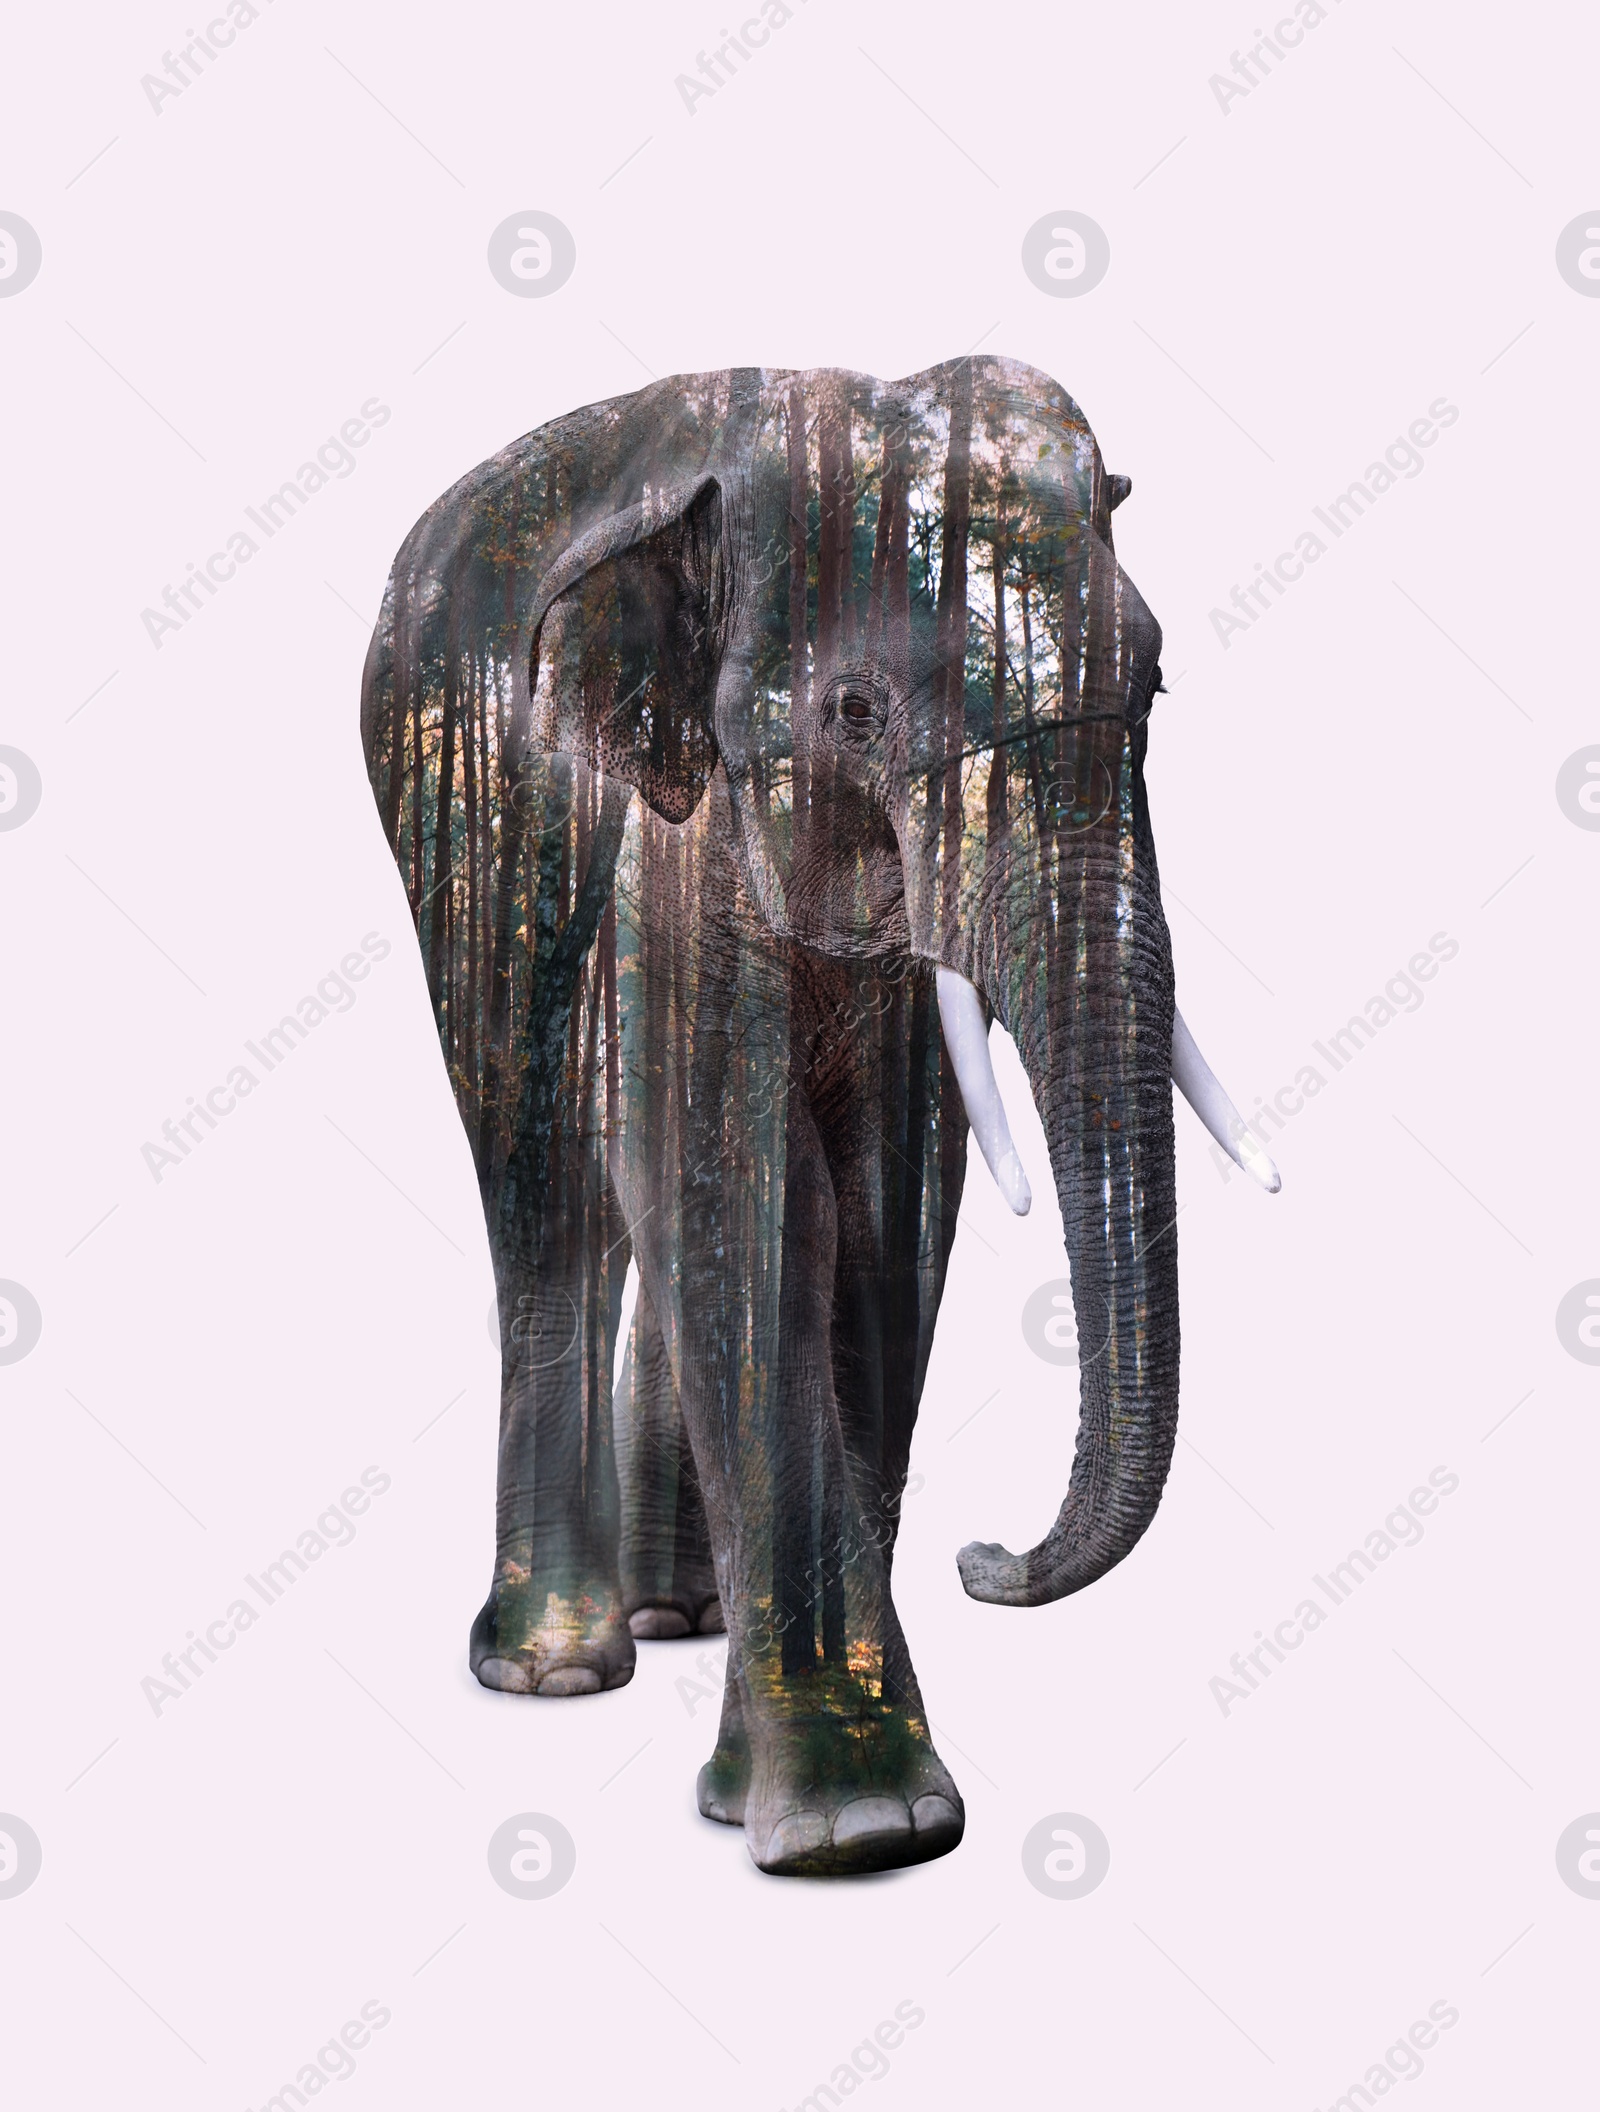 Image of Double exposure of large elephant and green forest